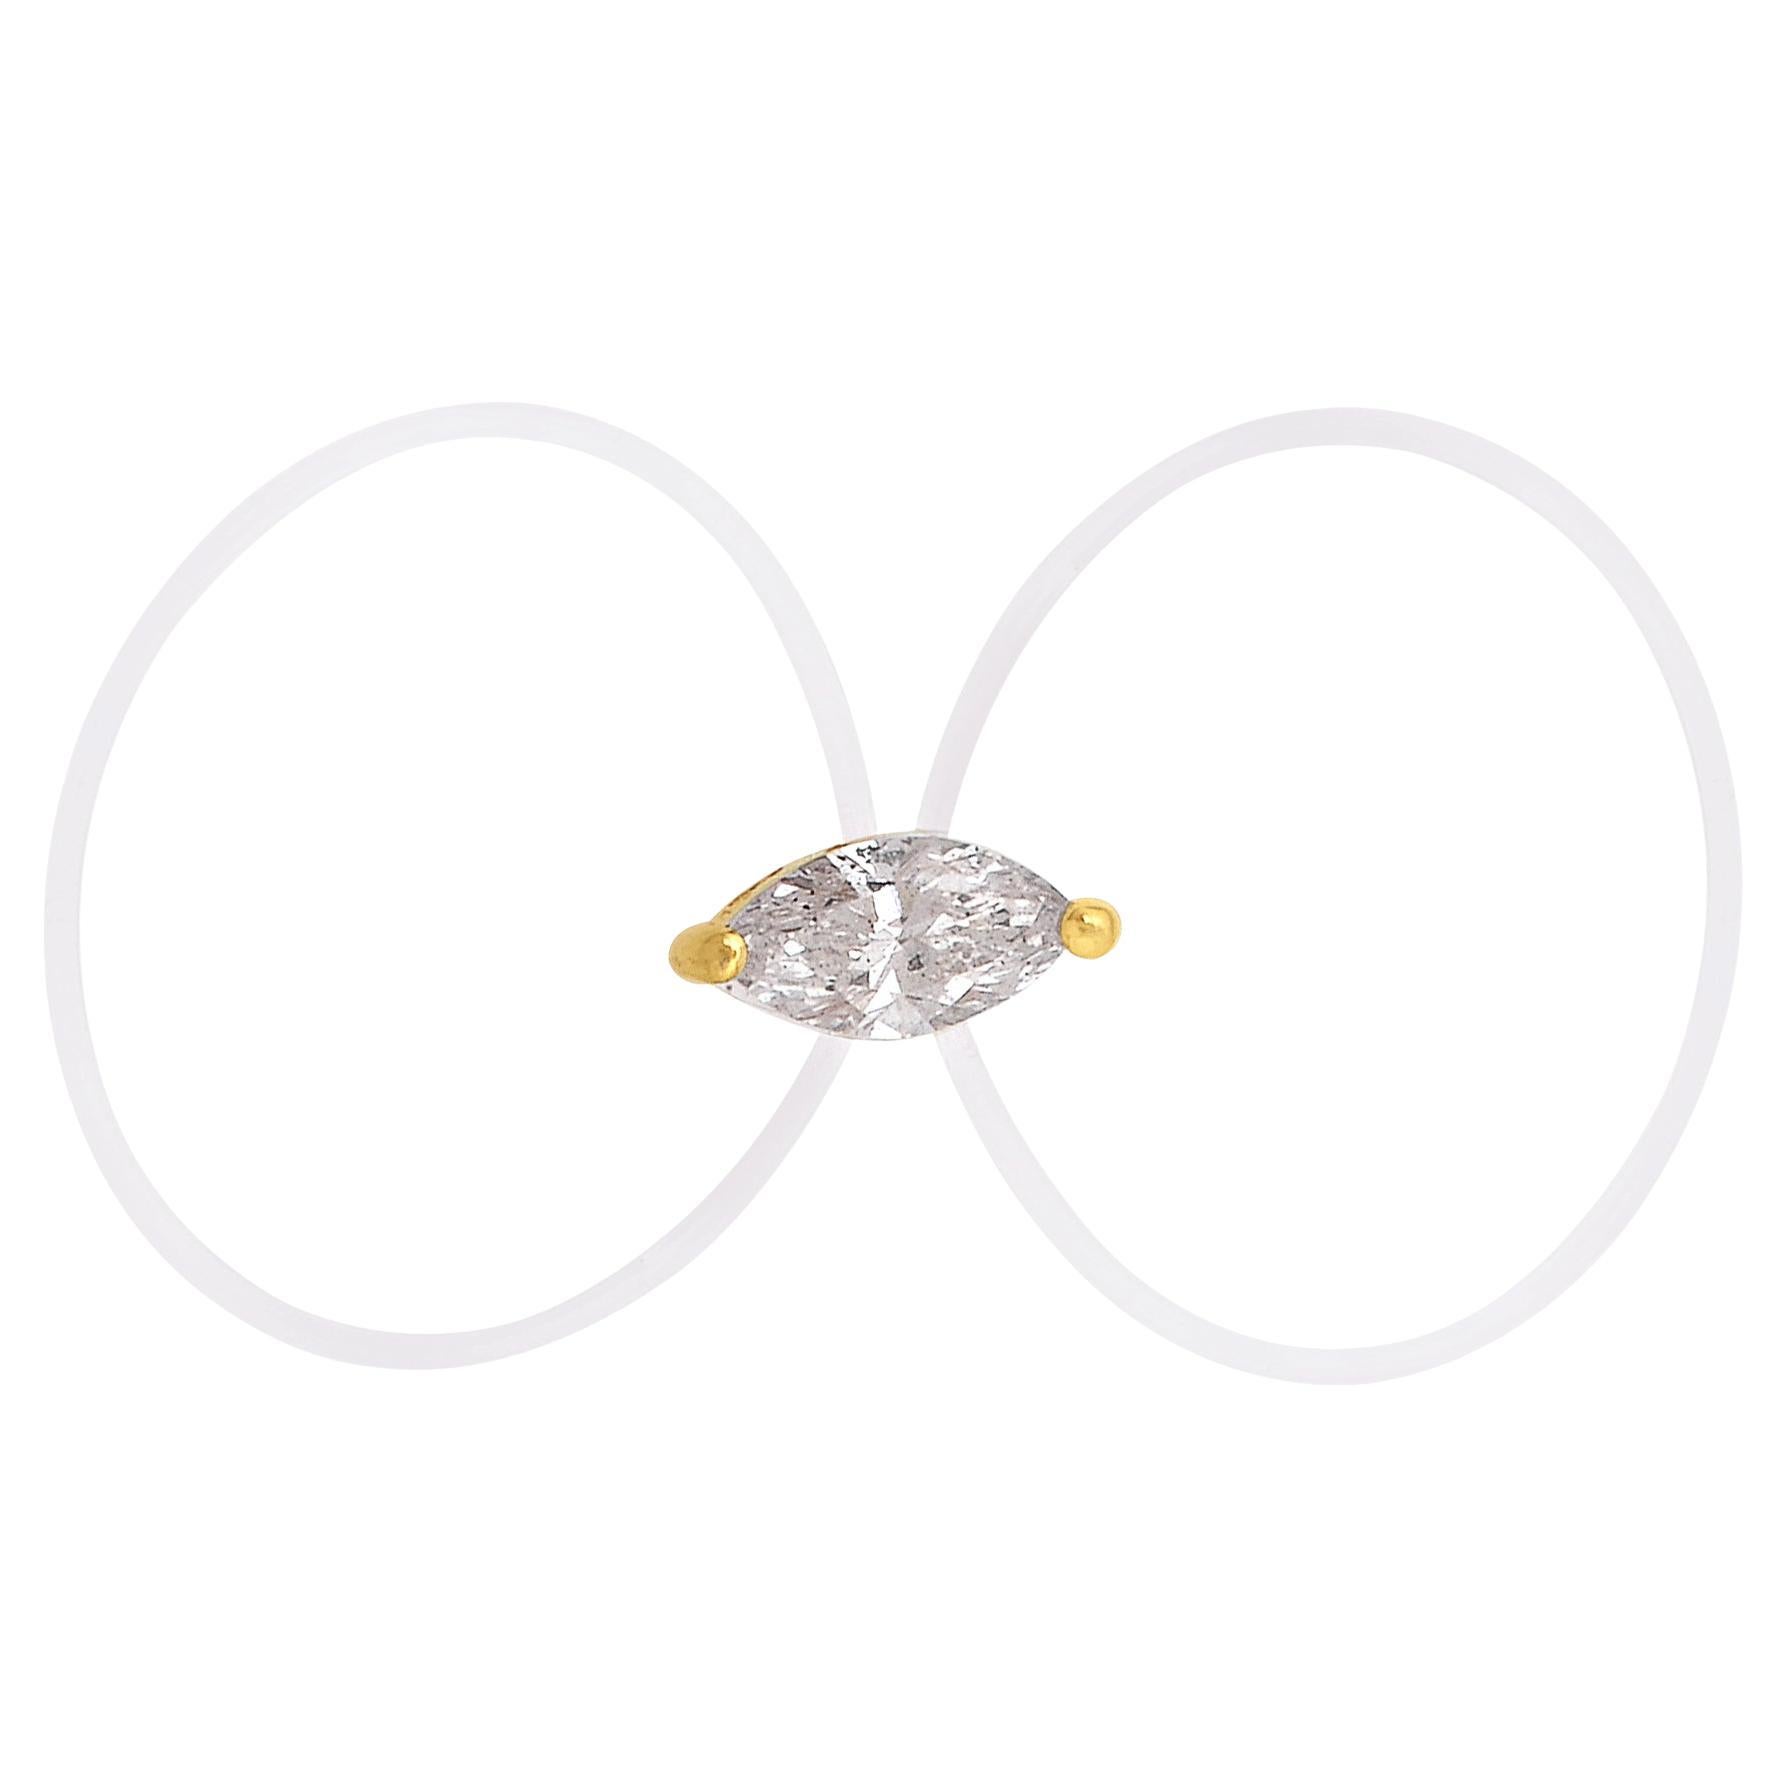 0.39 Carat Marquise Diamond Silicone Ring 18k Yellow Gold Handmade Fine Jewelry For Sale